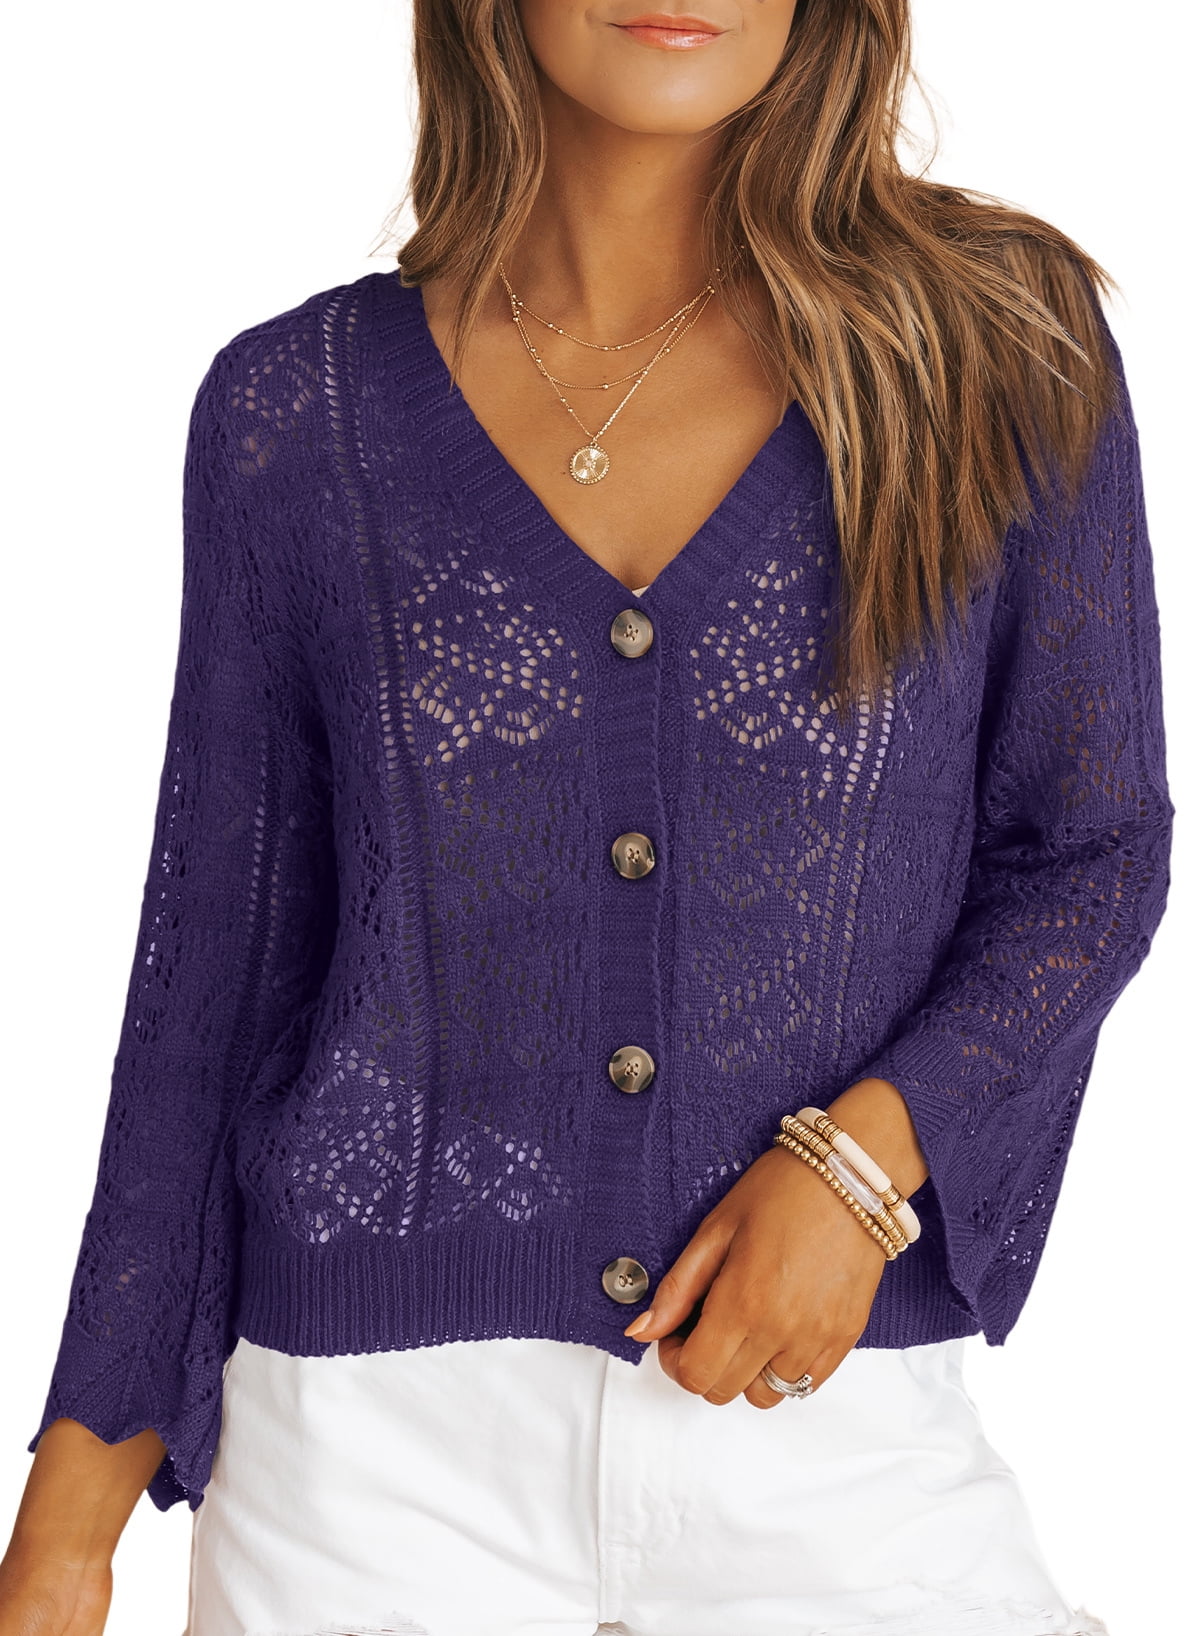 Eytino Cropped Cardigan Sweaters for Women Long Sleeve Crochet Knit Cardigan  Shrug Open Front V-Neck Button up Tops 